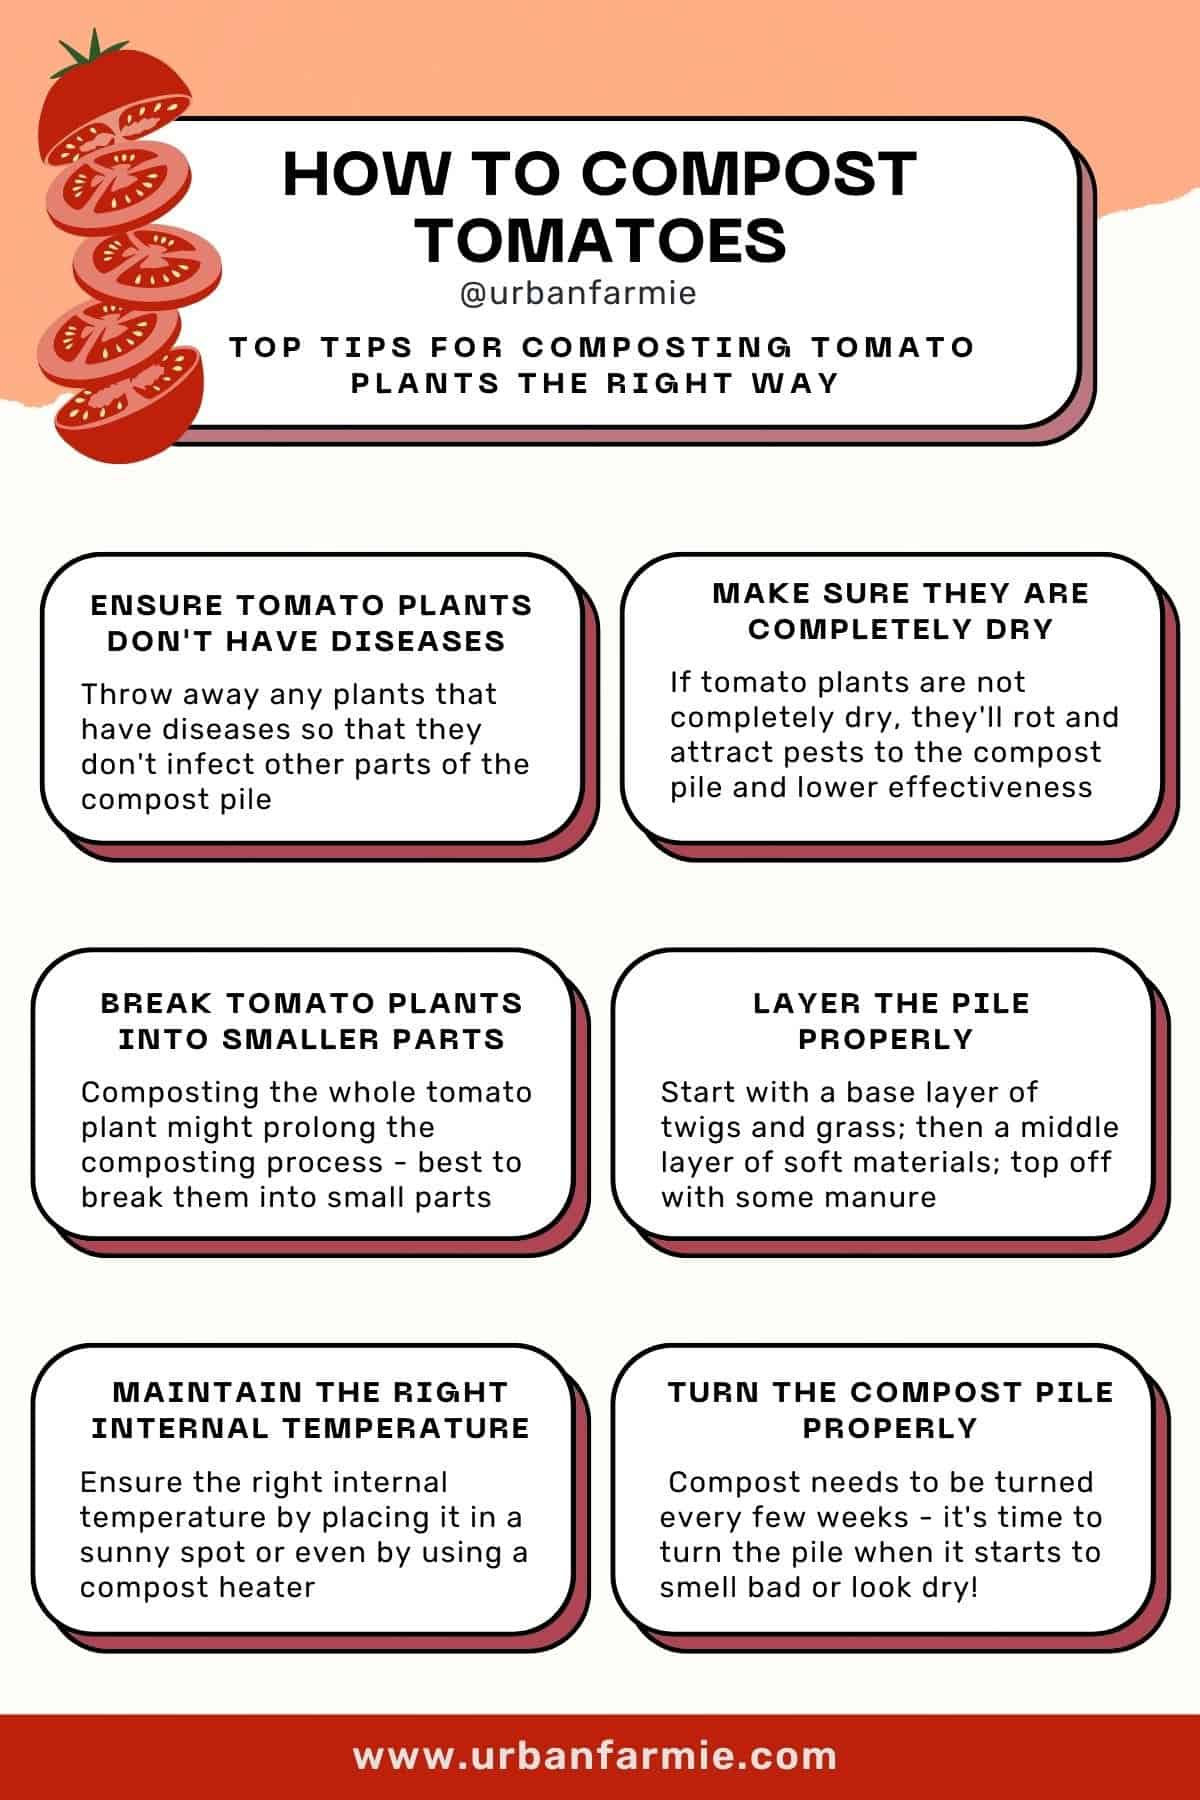 Infographic showing how to compost tomato plants by following (six top tips).